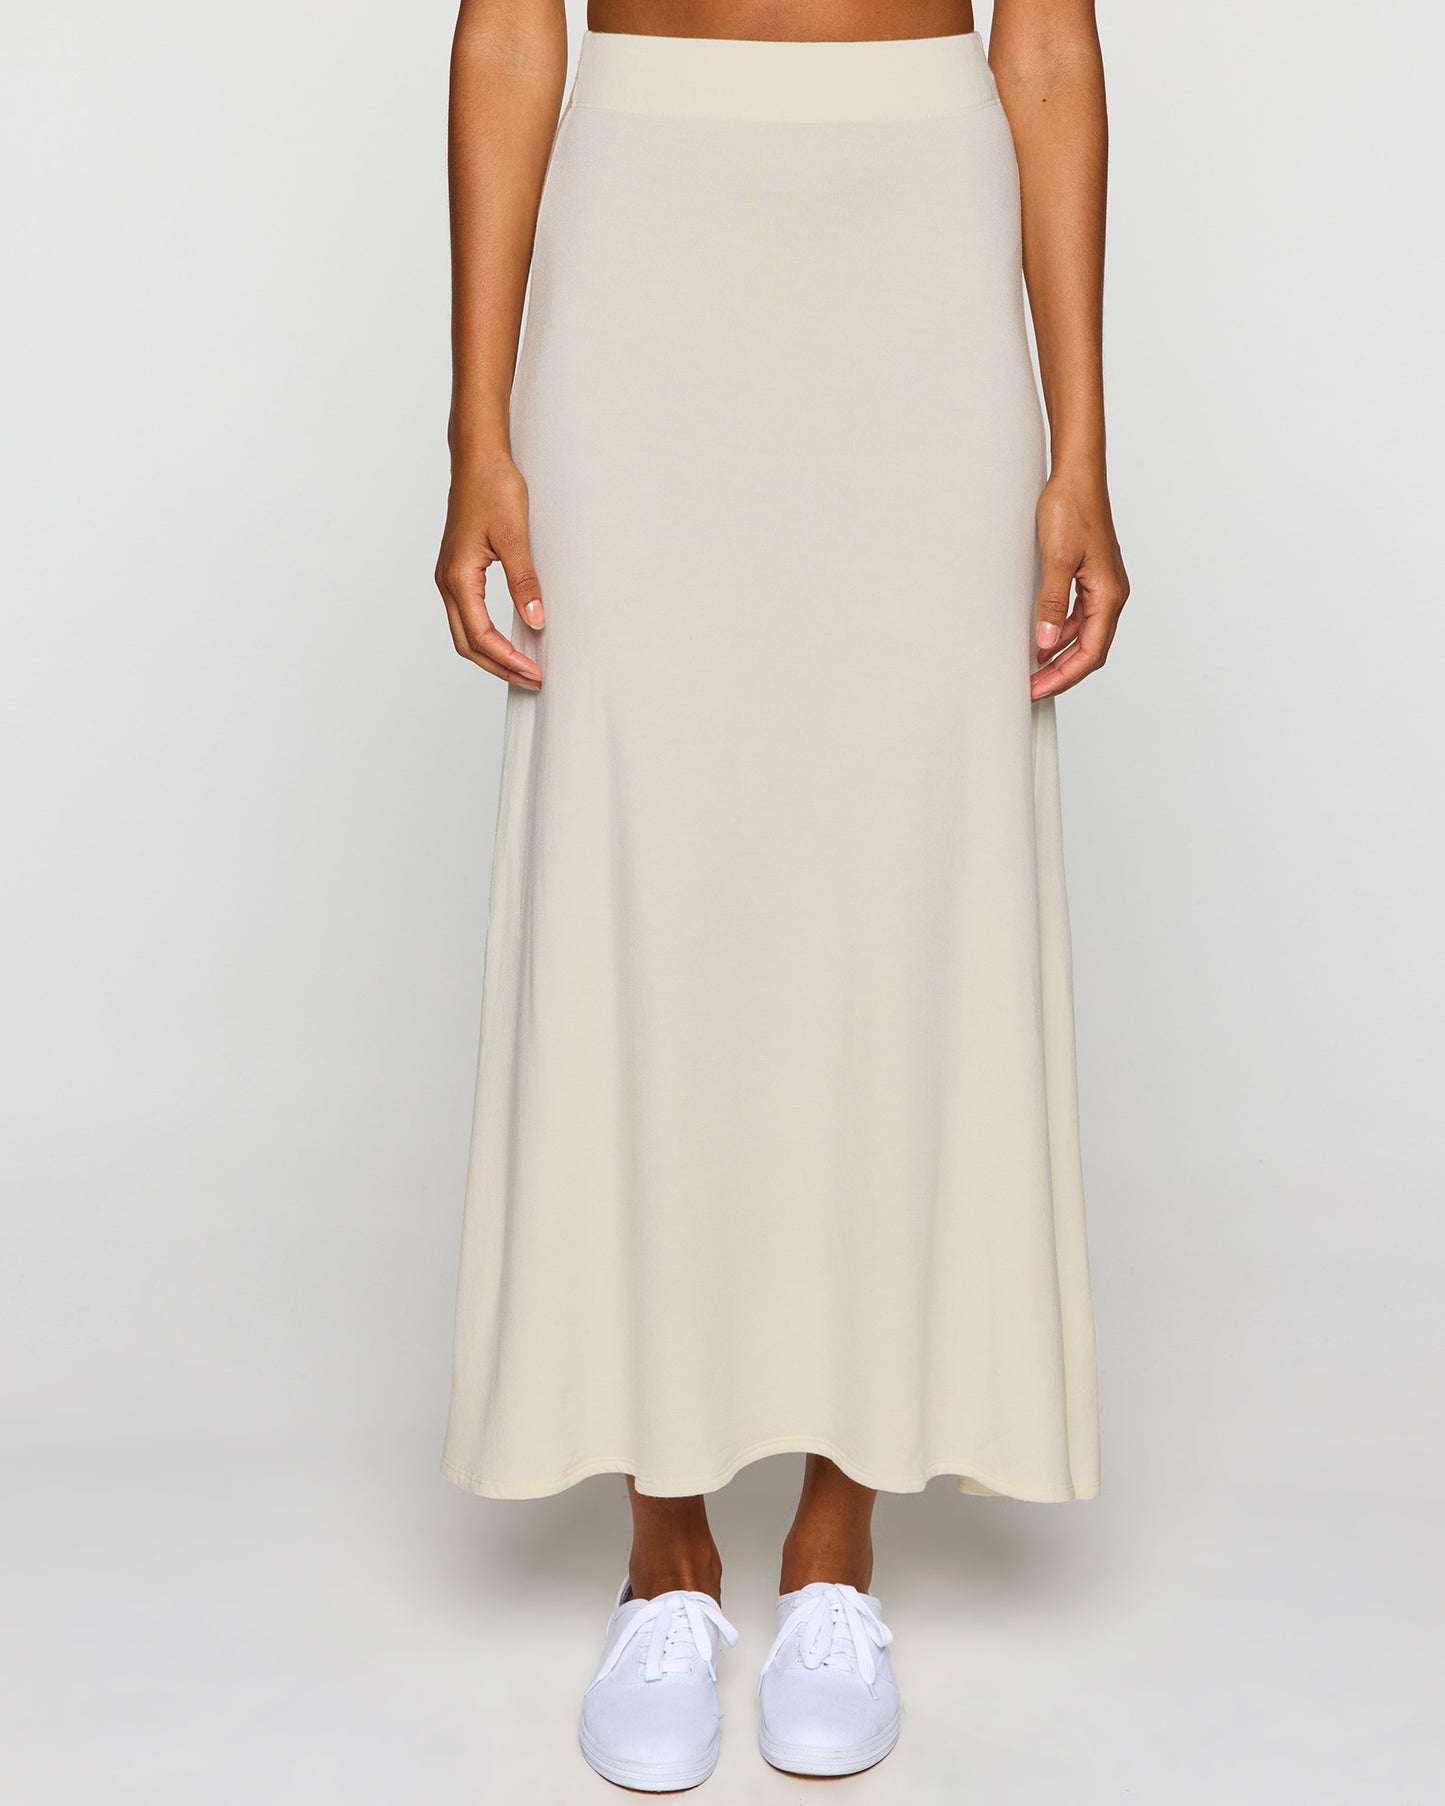 Stone | The Long A-Line Skirt Front